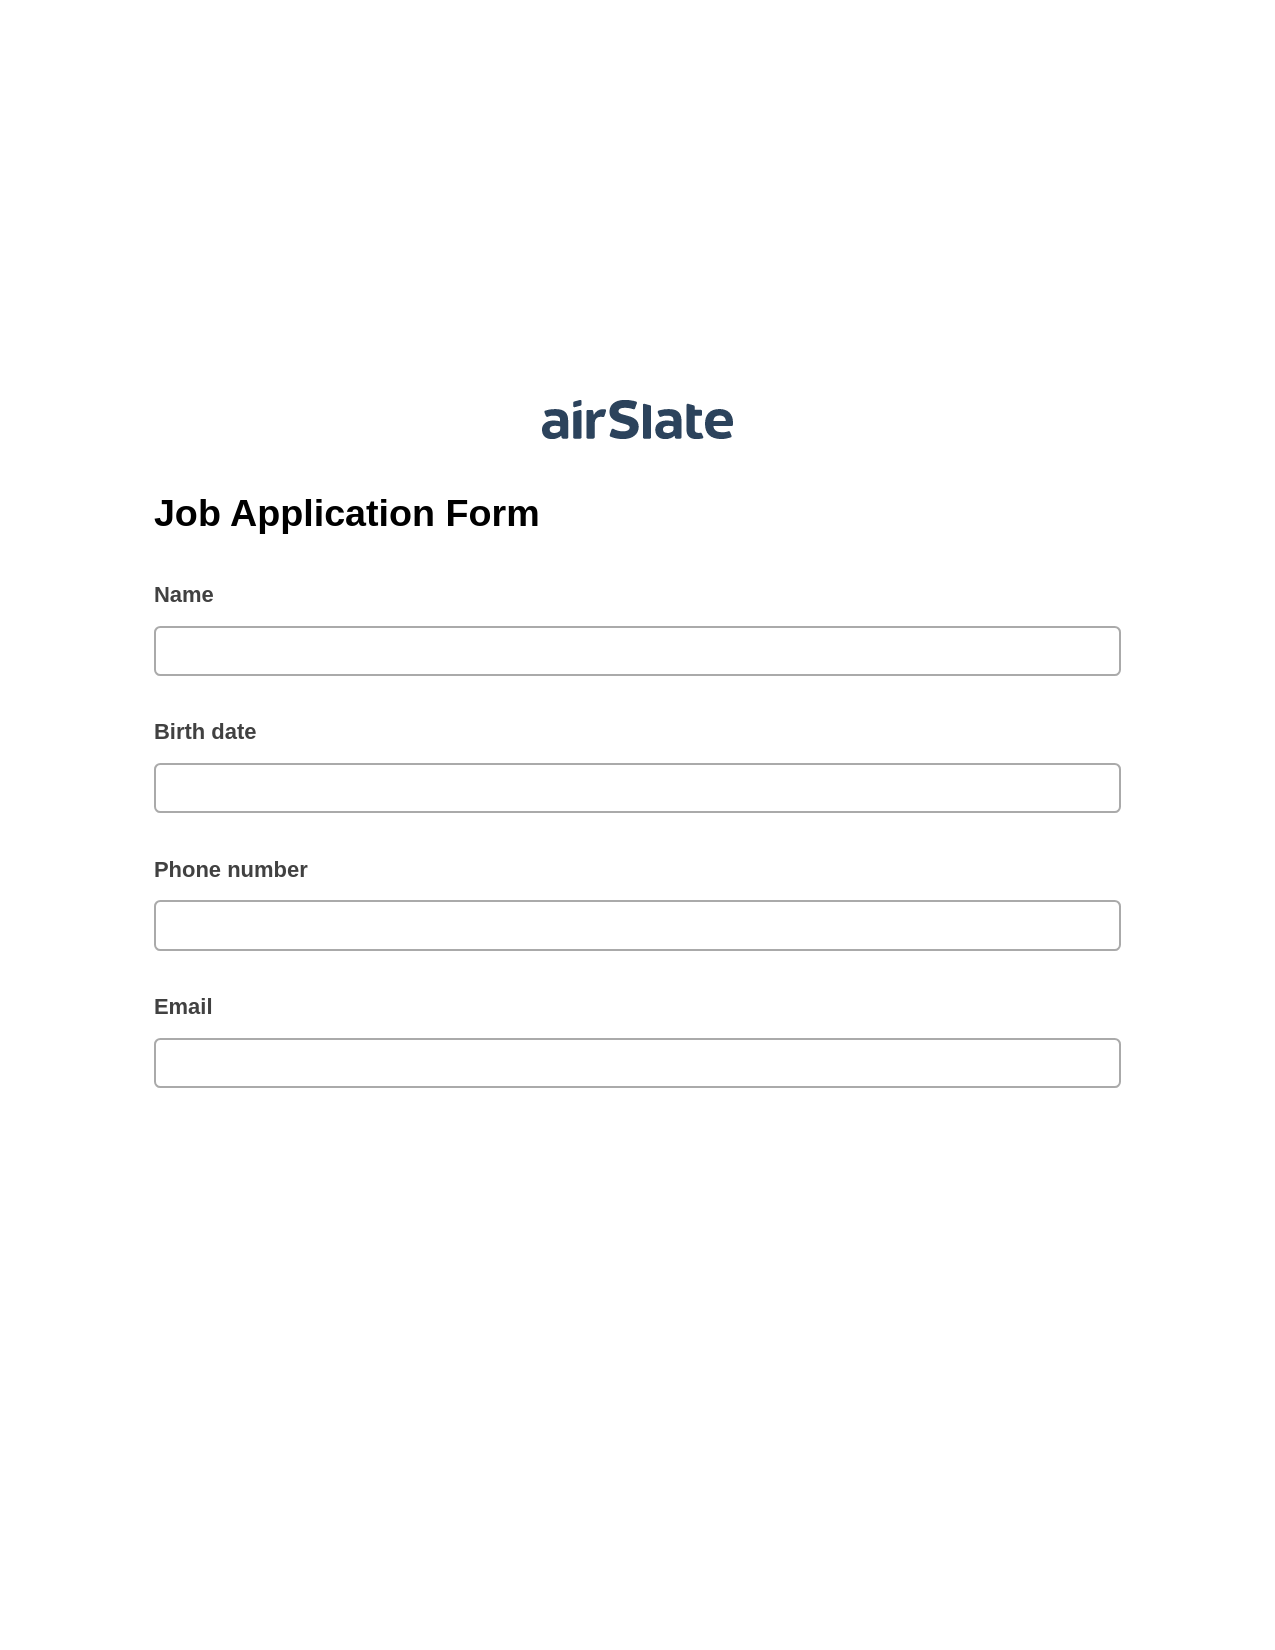 Job Application Form Pre-fill from CSV File Bot, Add Tags to Slate Bot, Archive to SharePoint Folder Bot